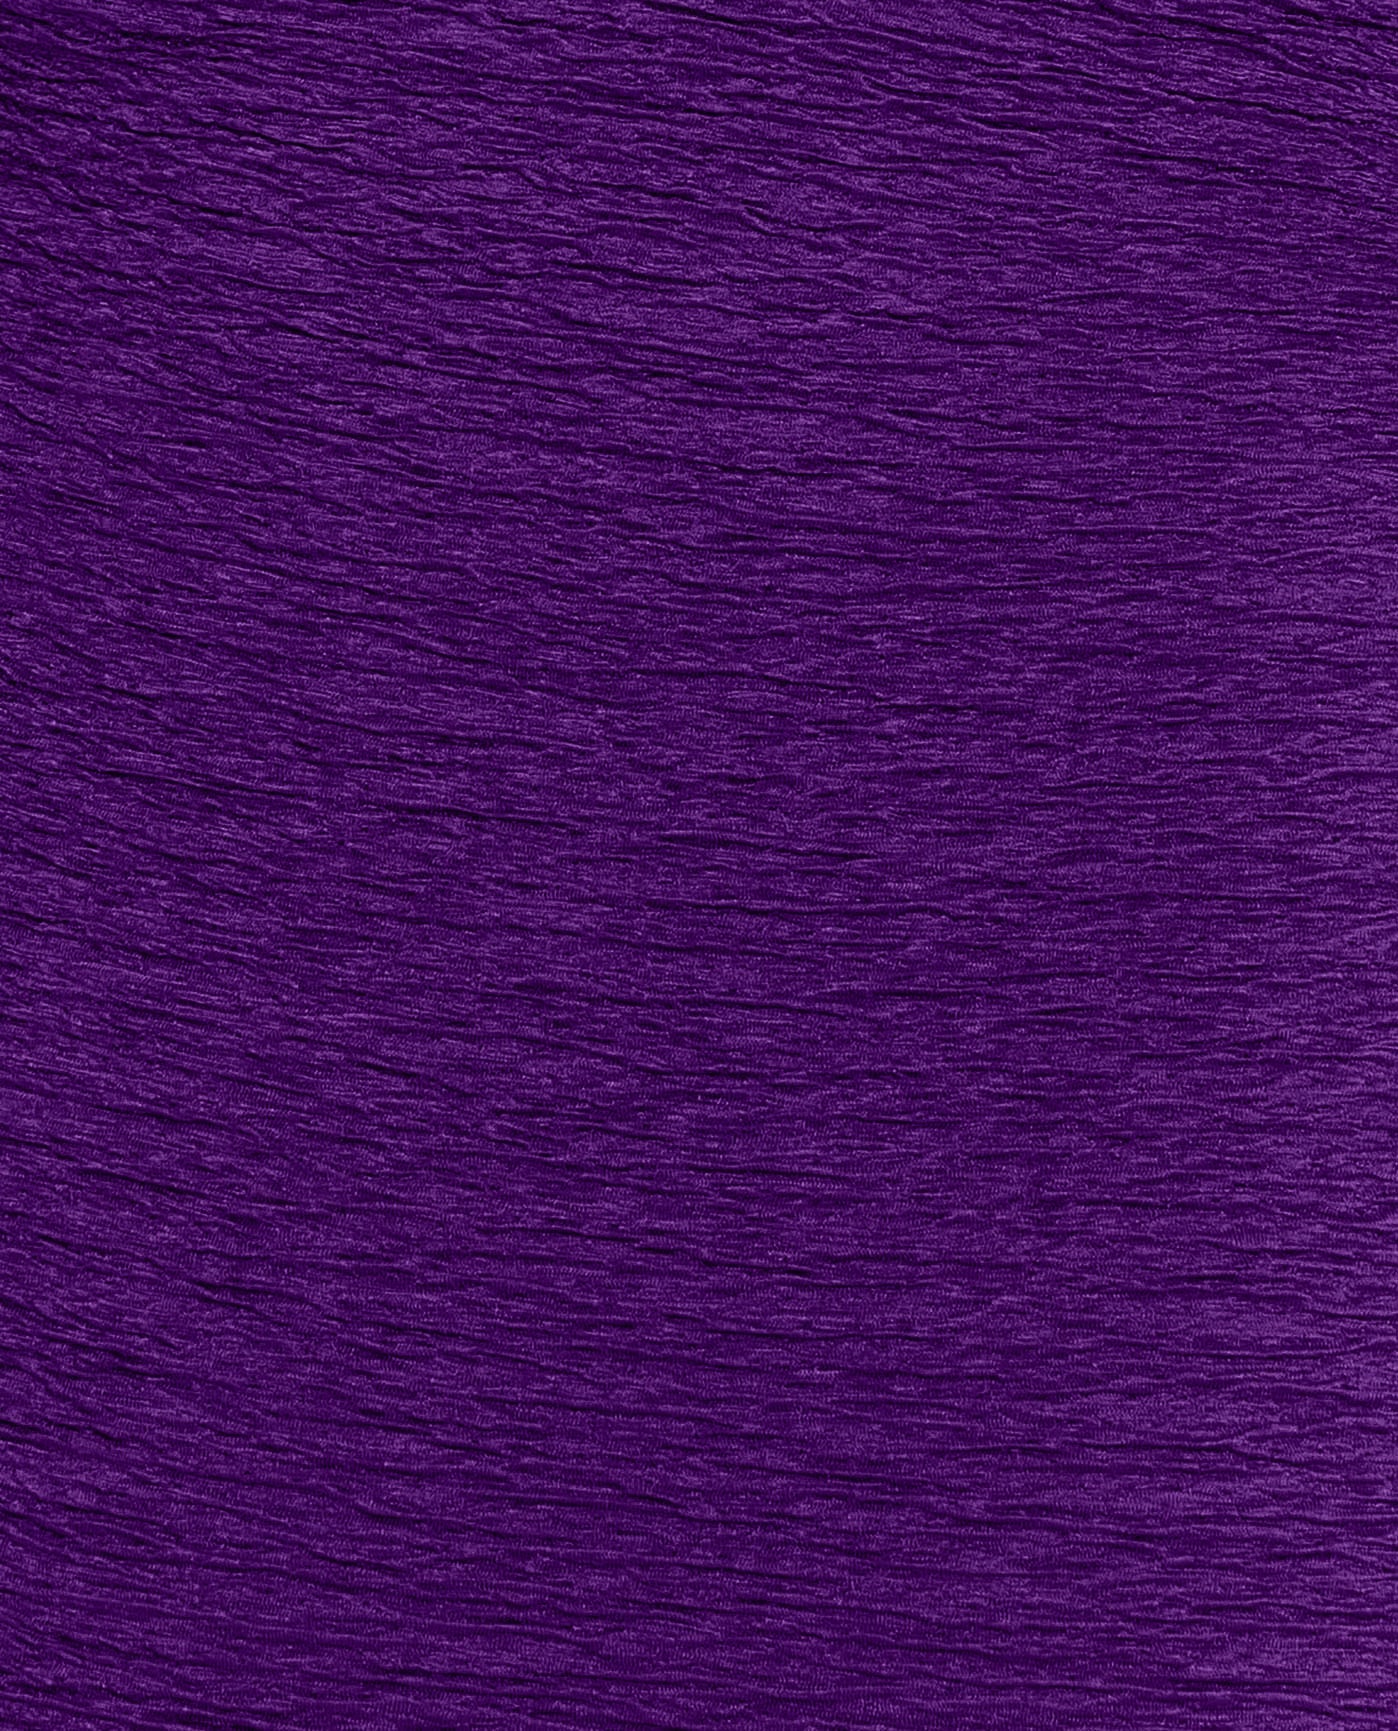 FABRIC SWATCH VIEW OF CHLORINE RESISTANT KRINKLE TEXTURED SOLID TWIST FRONT PLUS SIZE ONE PIECE | KRINKLE ACAI PURPLE